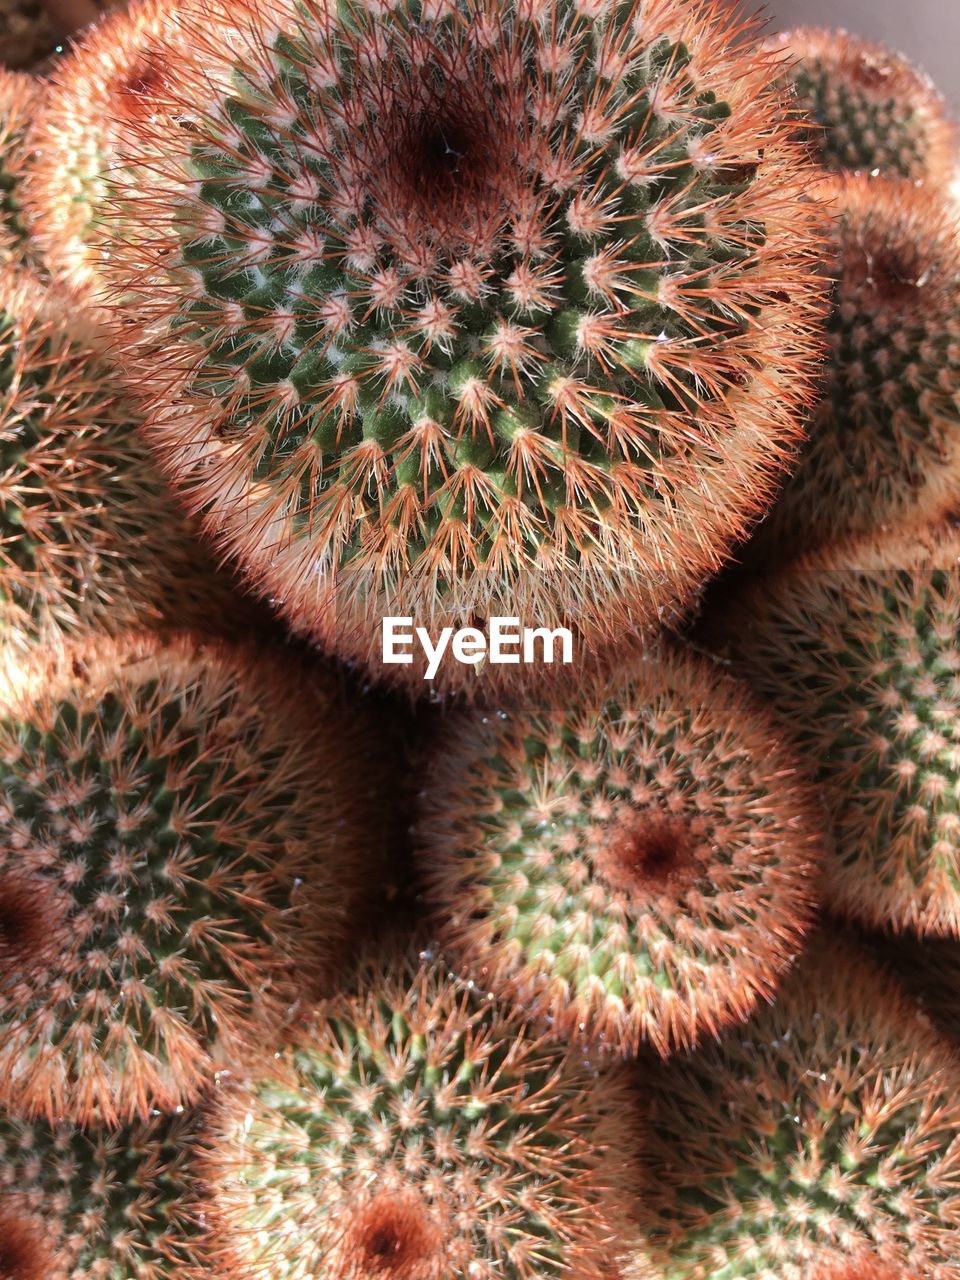 plant, cactus, no people, thorn, food and drink, succulent plant, sharp, food, close-up, flower, healthy eating, nature, spiked, full frame, backgrounds, freshness, produce, wellbeing, fruit, growth, high angle view, outdoors, green, beauty in nature, macro photography, barrel cactus